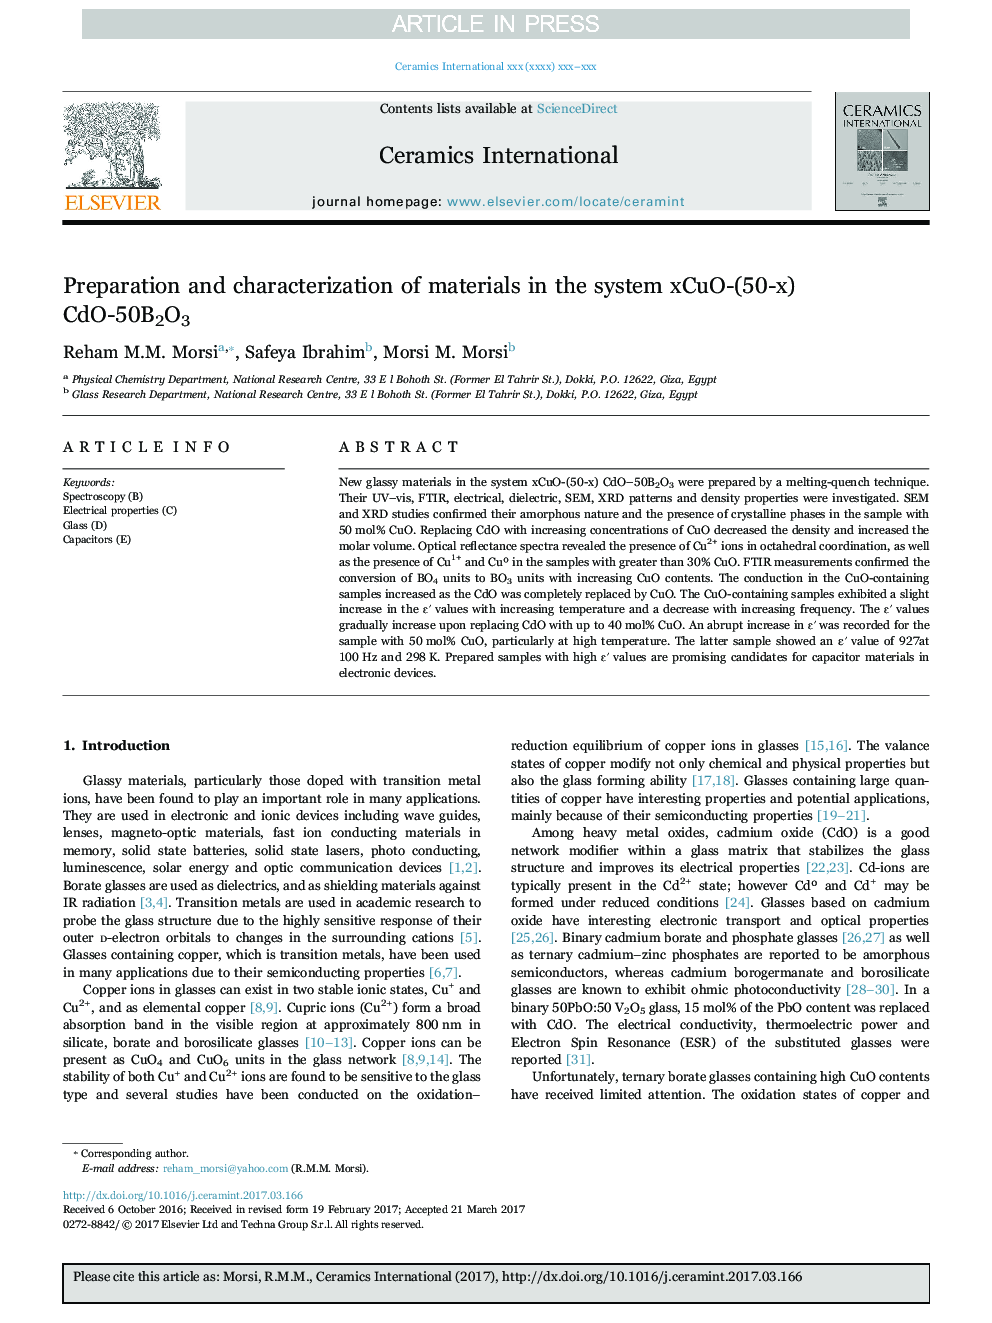 Preparation and characterization of materials in the system xCuO-(50-x) CdO-50B2O3